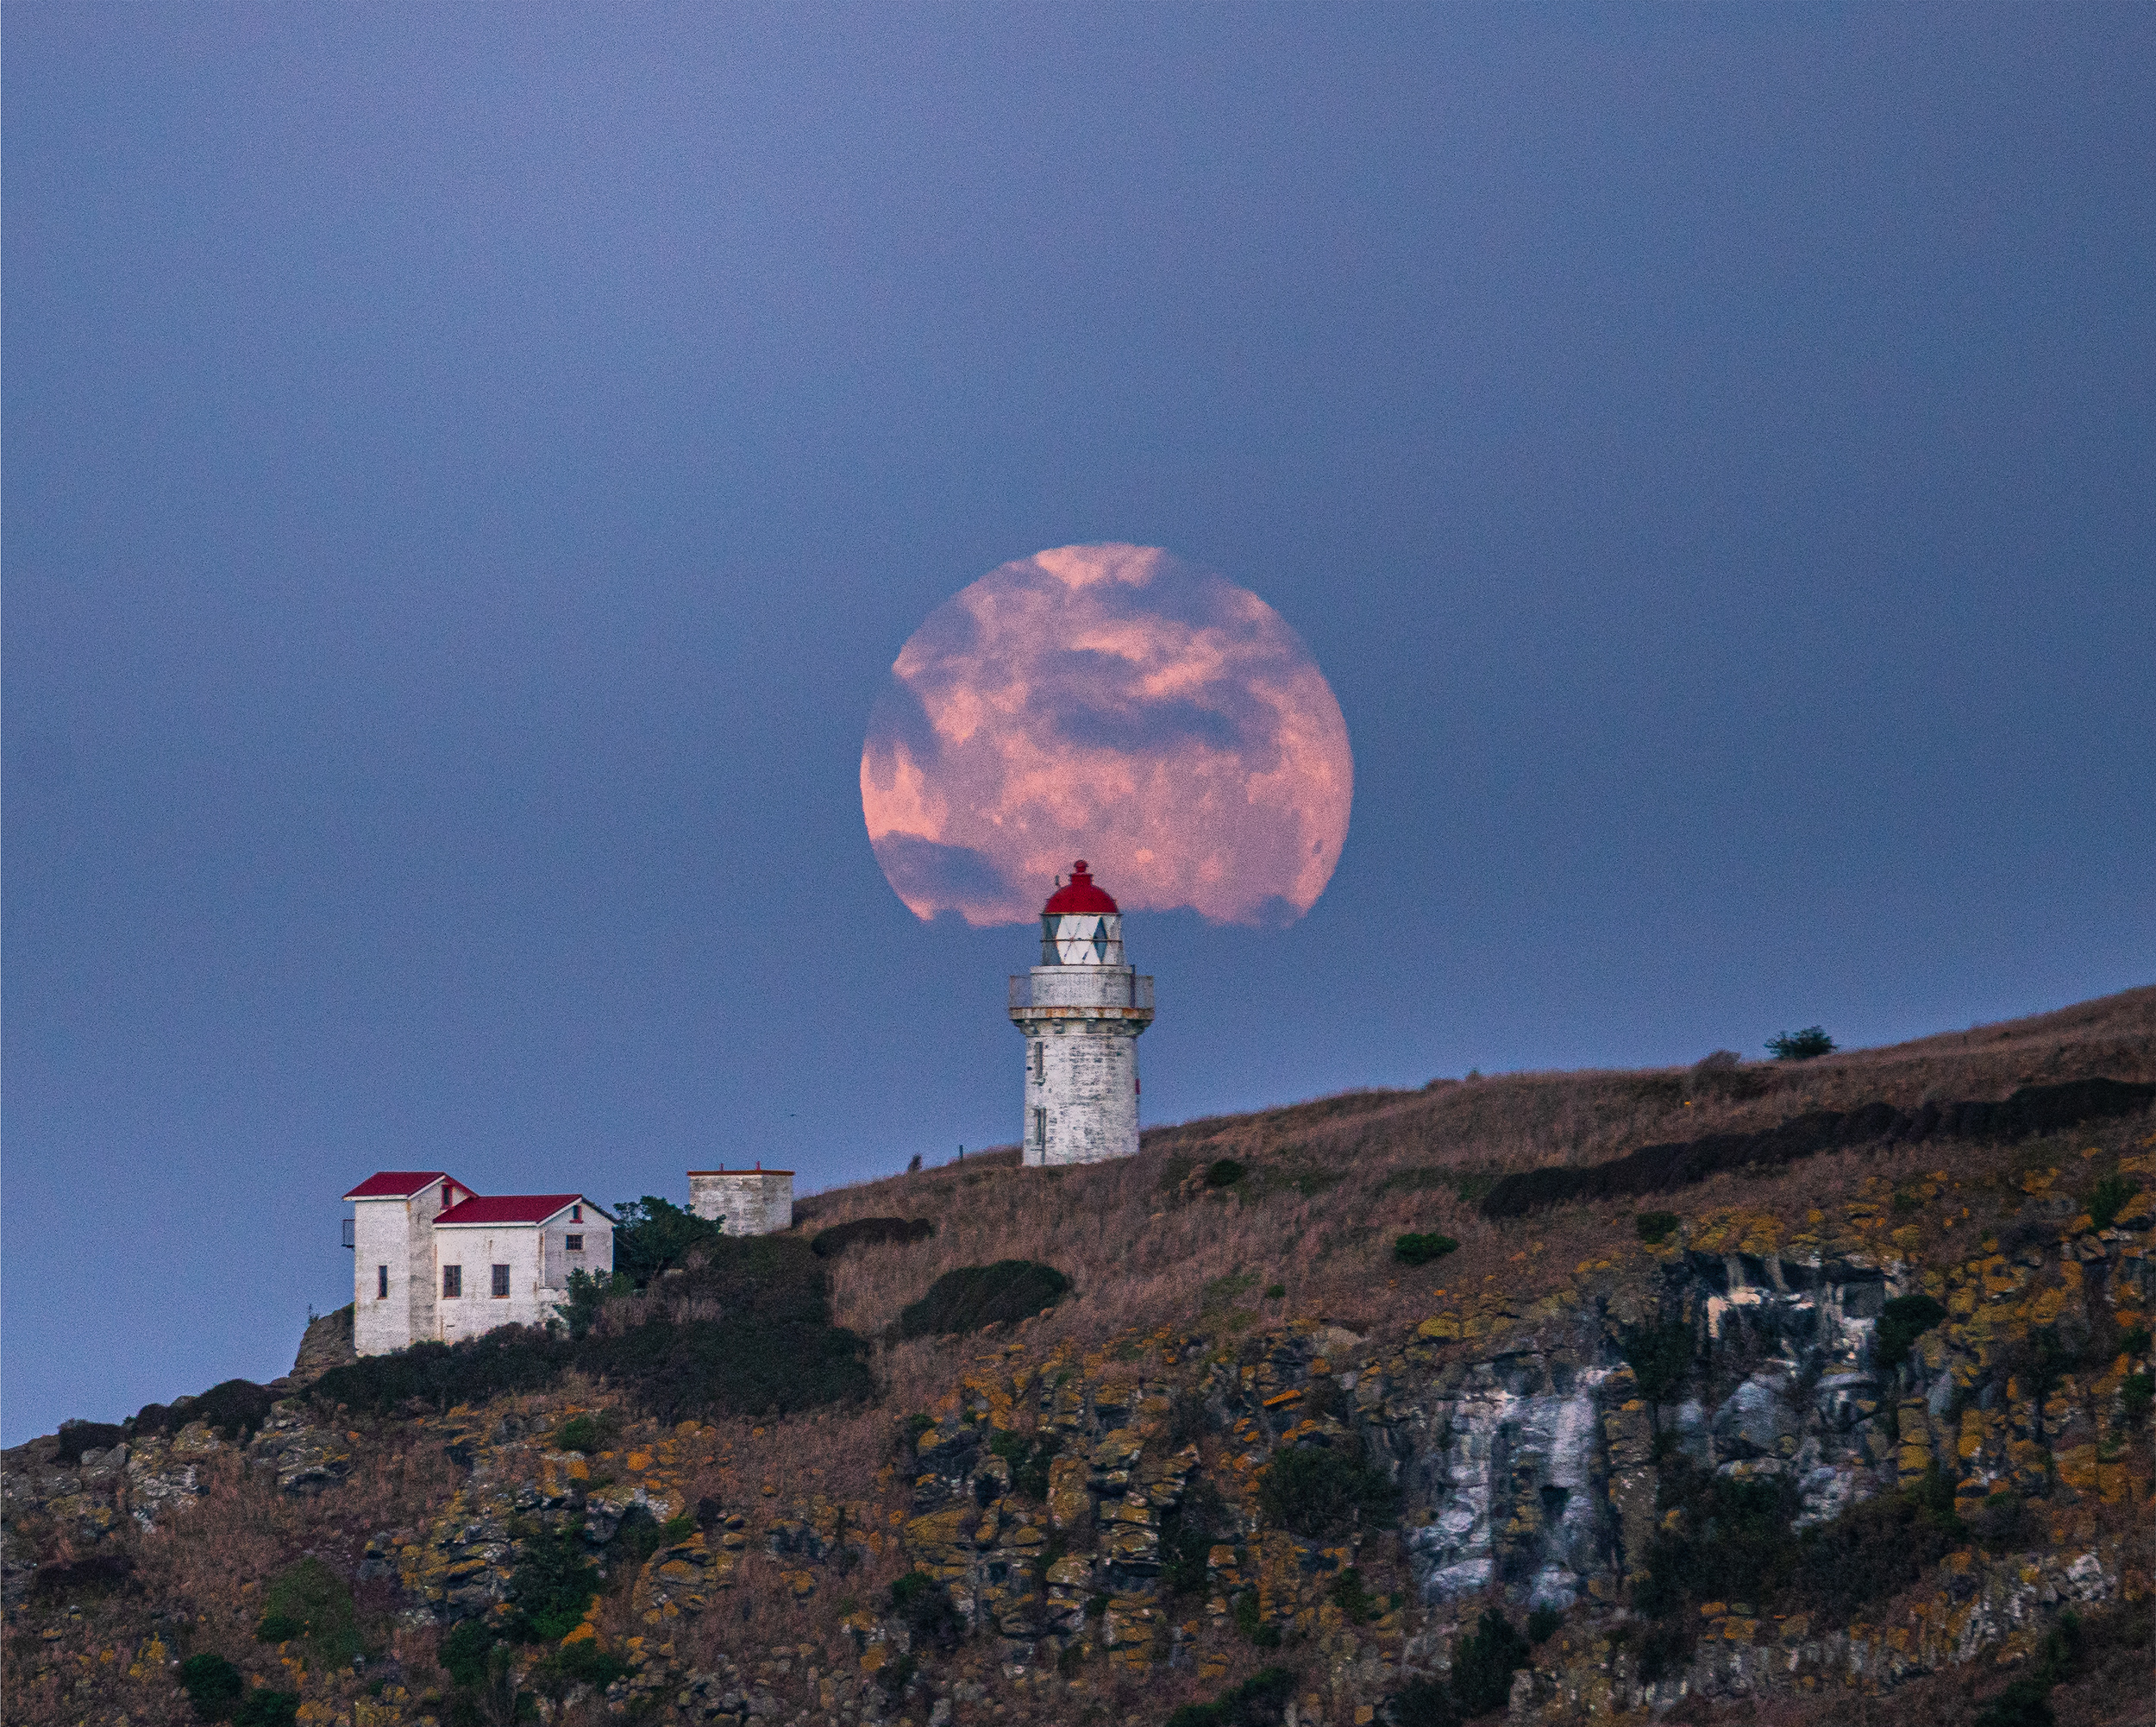 Telephoto lens shot zoomed in on lighthouse from Aramoana beach accross the Otago Harbour. The distance to shot gives effect of lighthouse dwarfed by full moon appearing twice as big behind it.